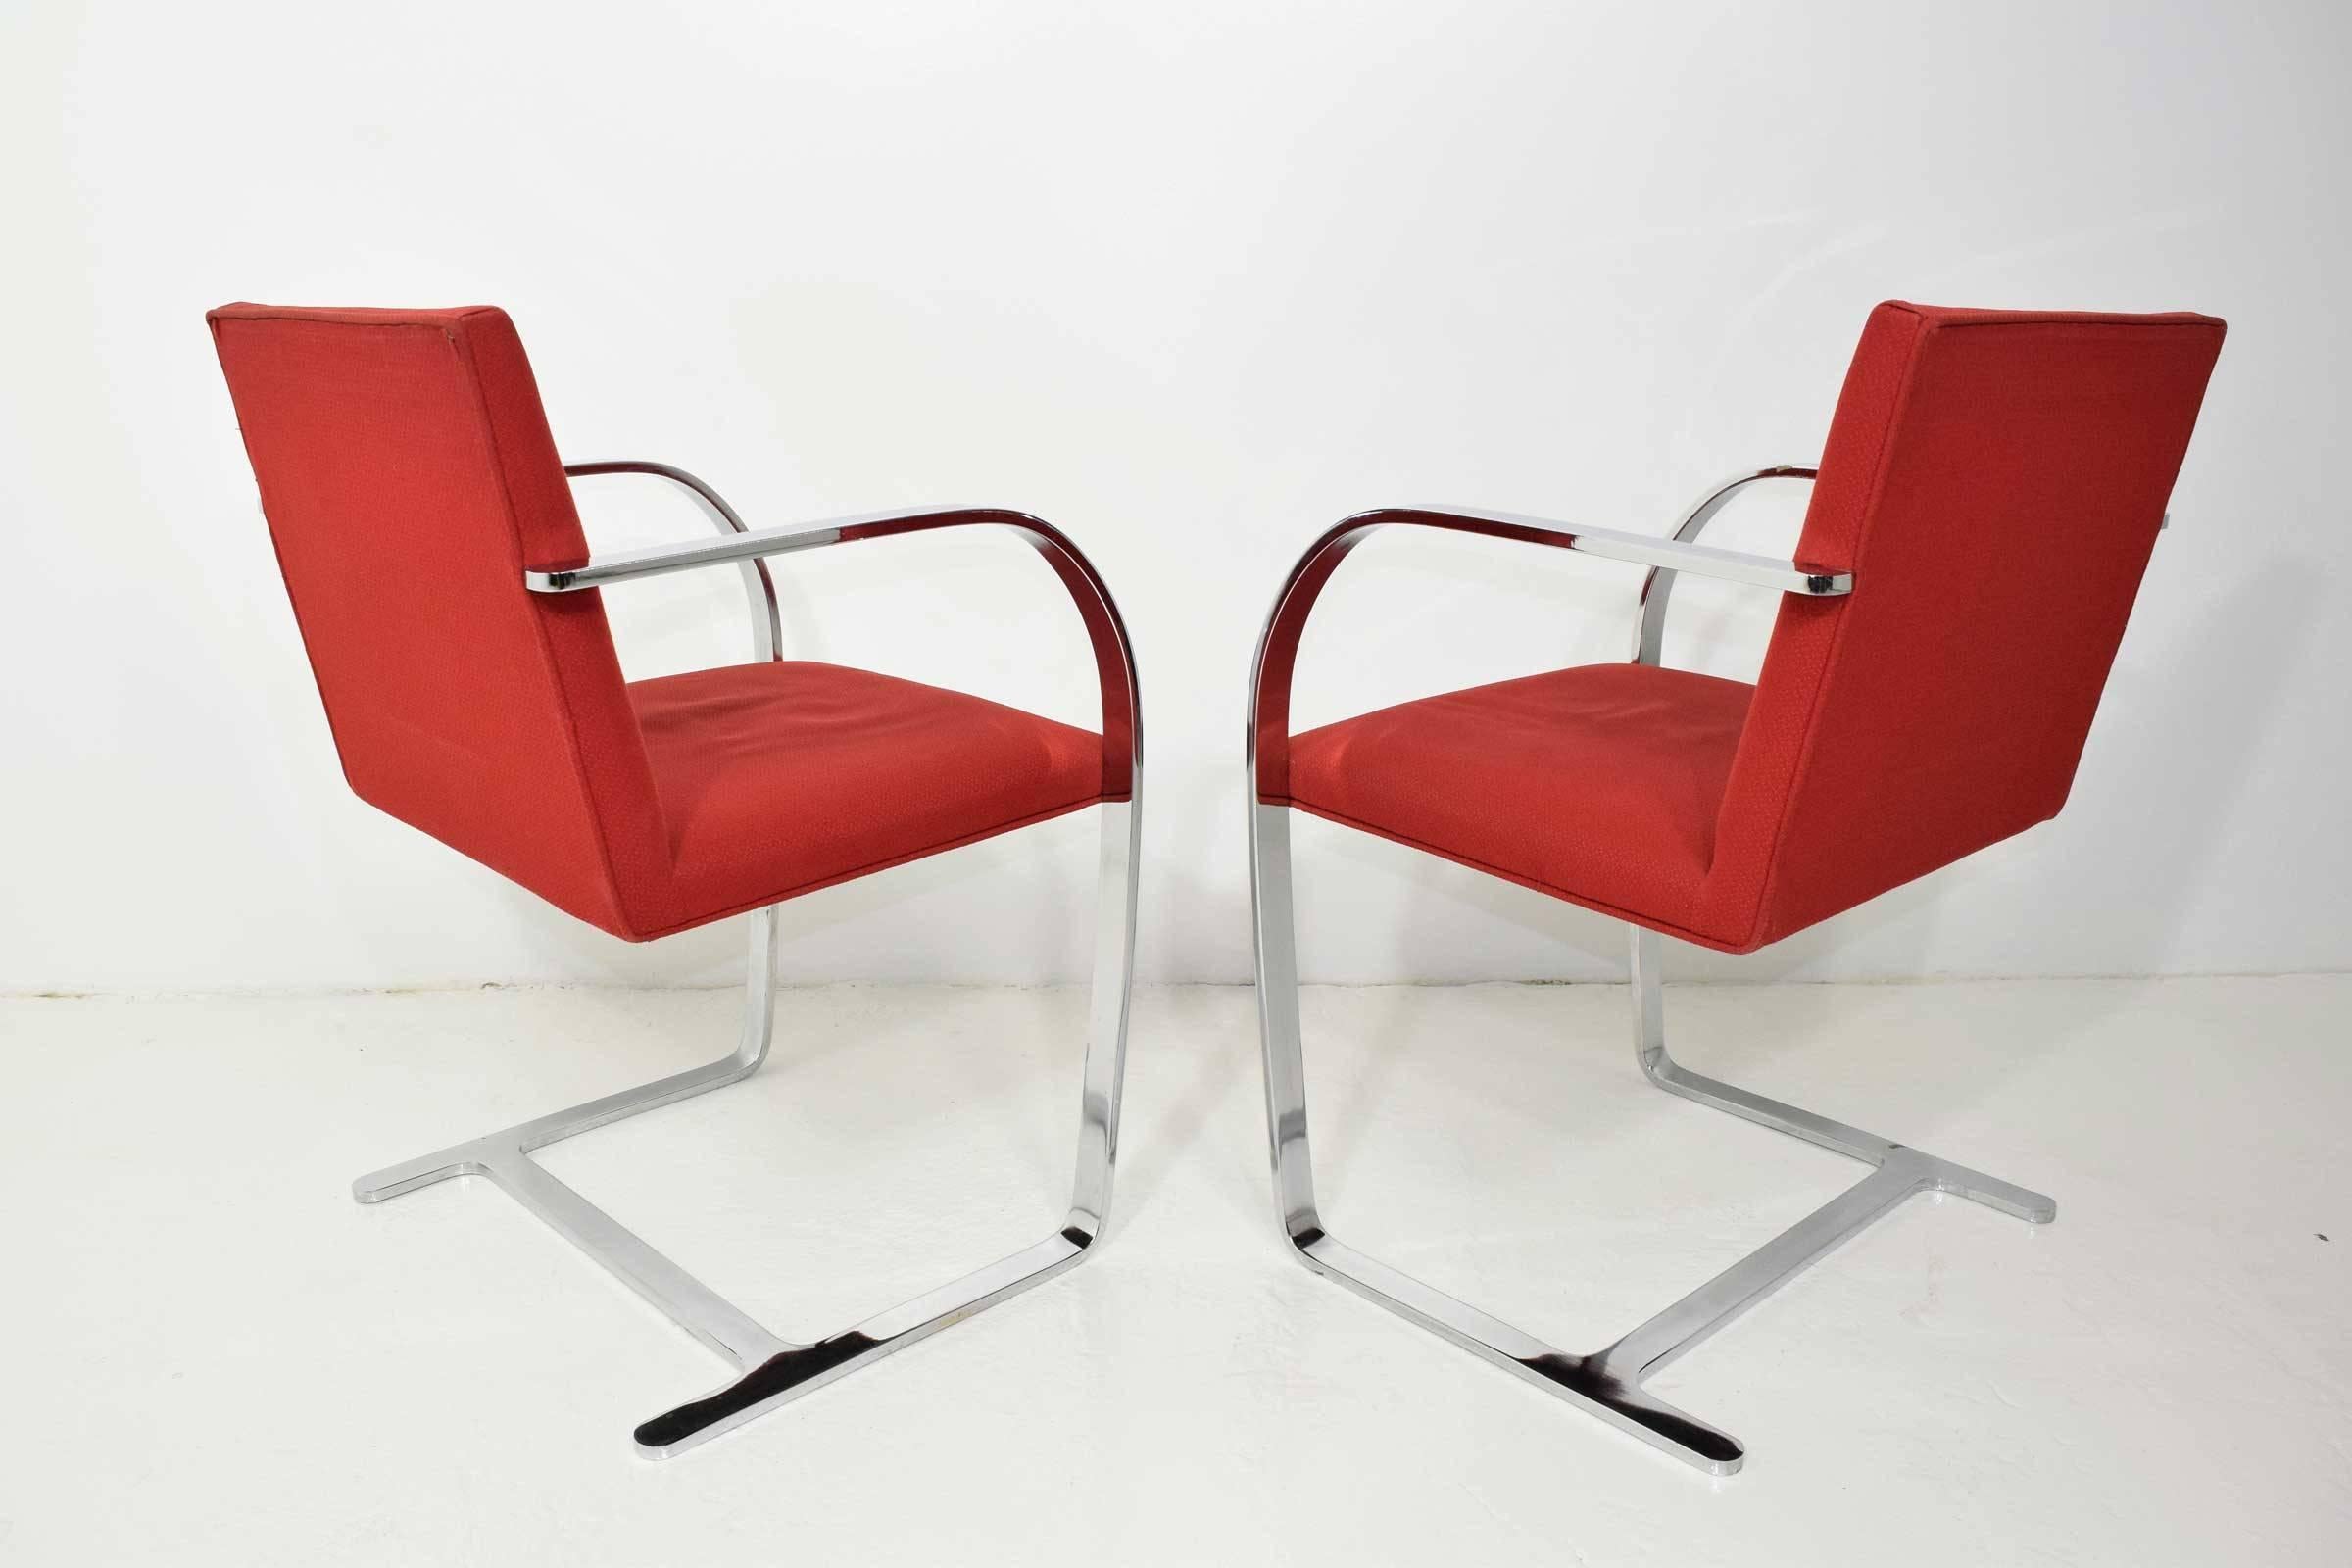 Pair of Brno chairs with steel frames and red upholstery. By Gordon International.